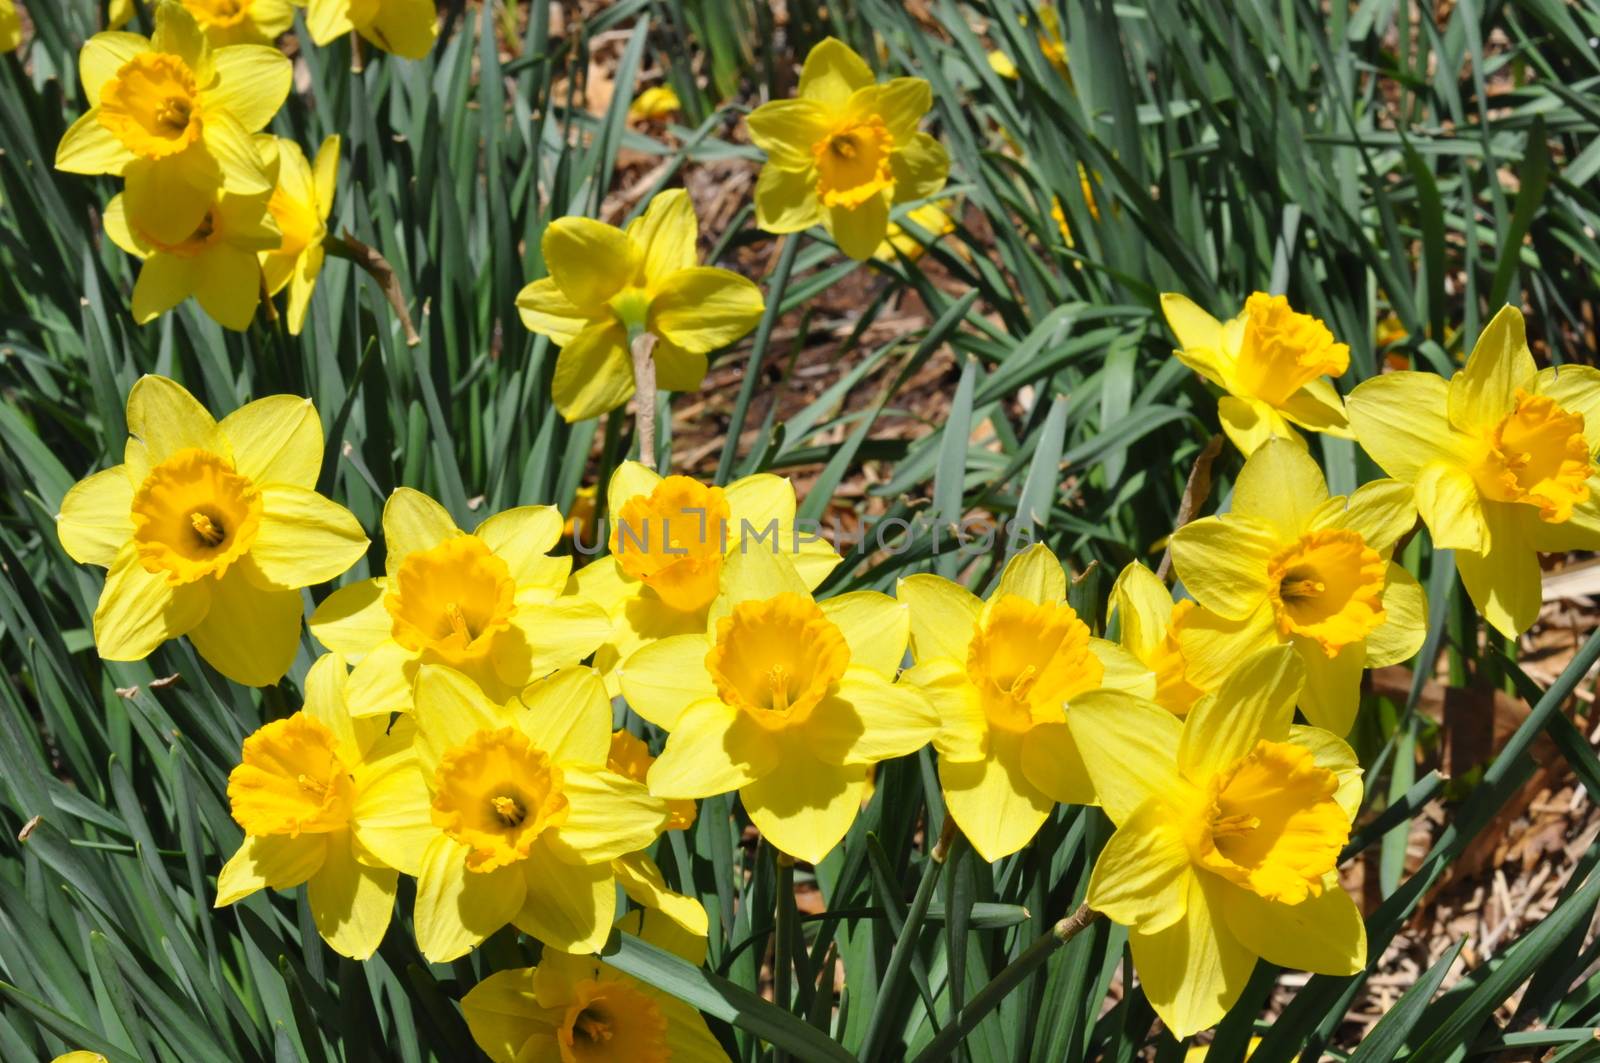 Daffodils at Hubbard Park in Meriden, Connecticut